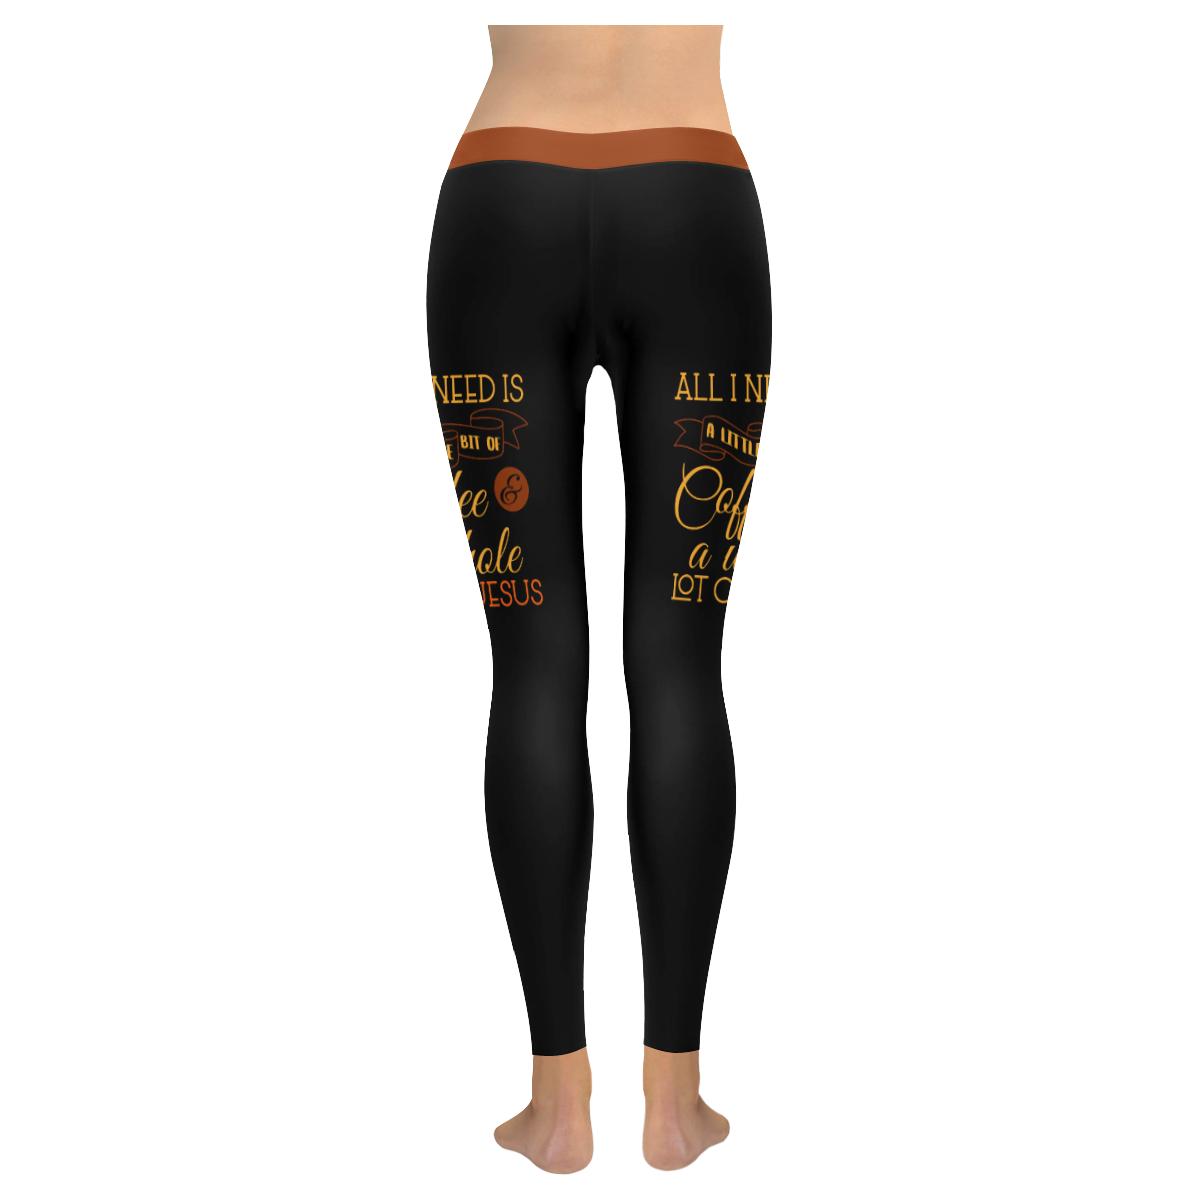 All I Need Is Coffee & A Whole Lot Of Jesus Soft Leggings For Women - Christian Leggings For Women